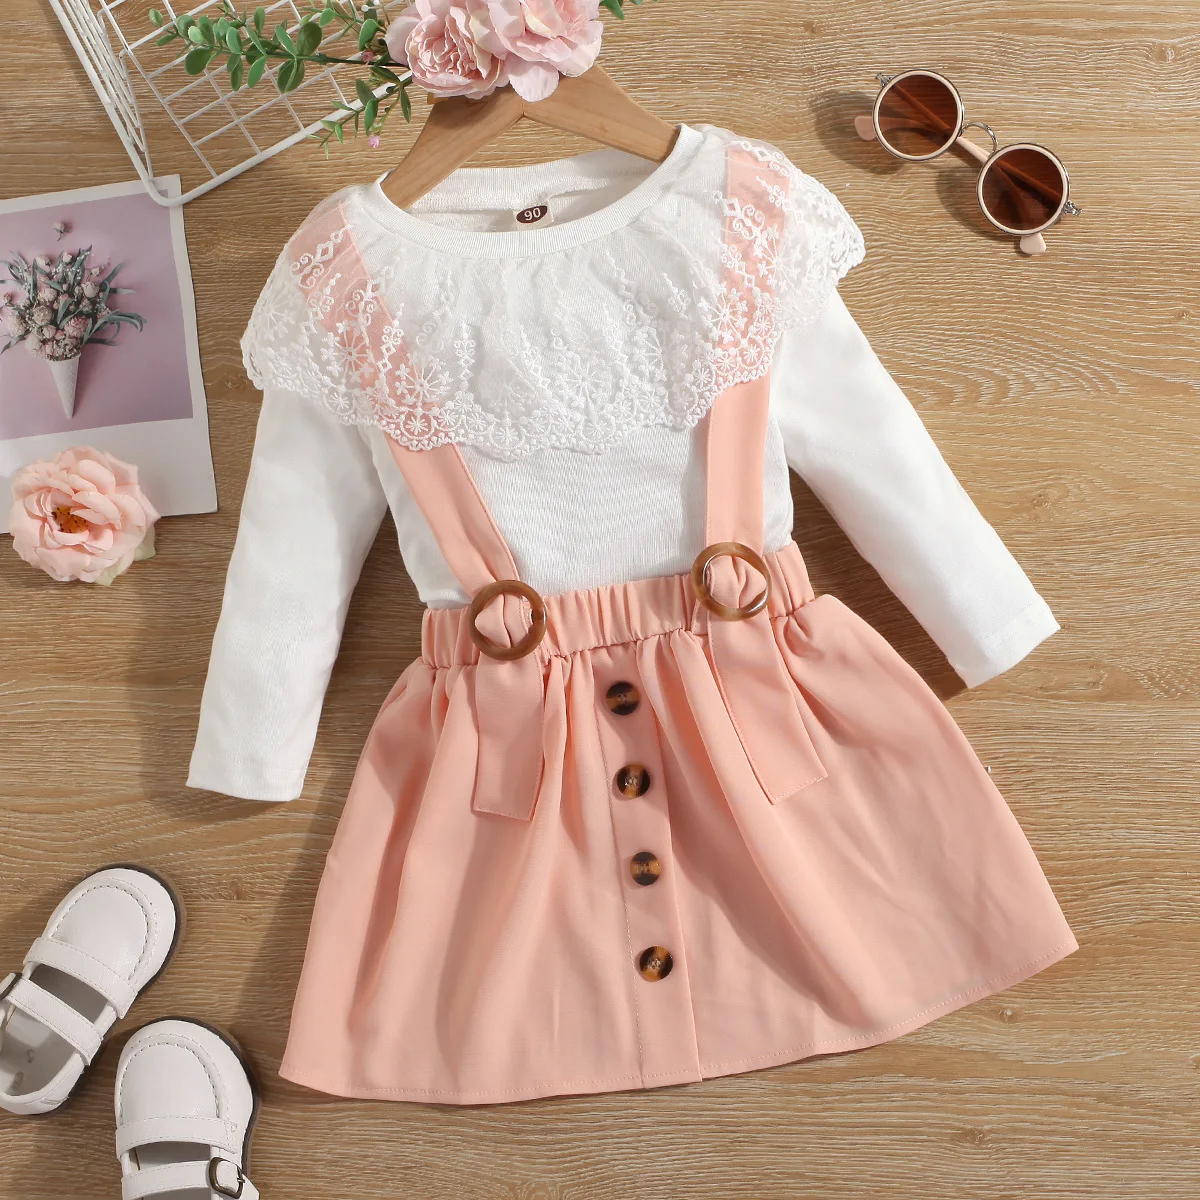 

Toddler Girls Clothing set Infant solid long sleeve lace collar shirt and sleeveless overalls skirt 2 pcs set for kids, Picture shows